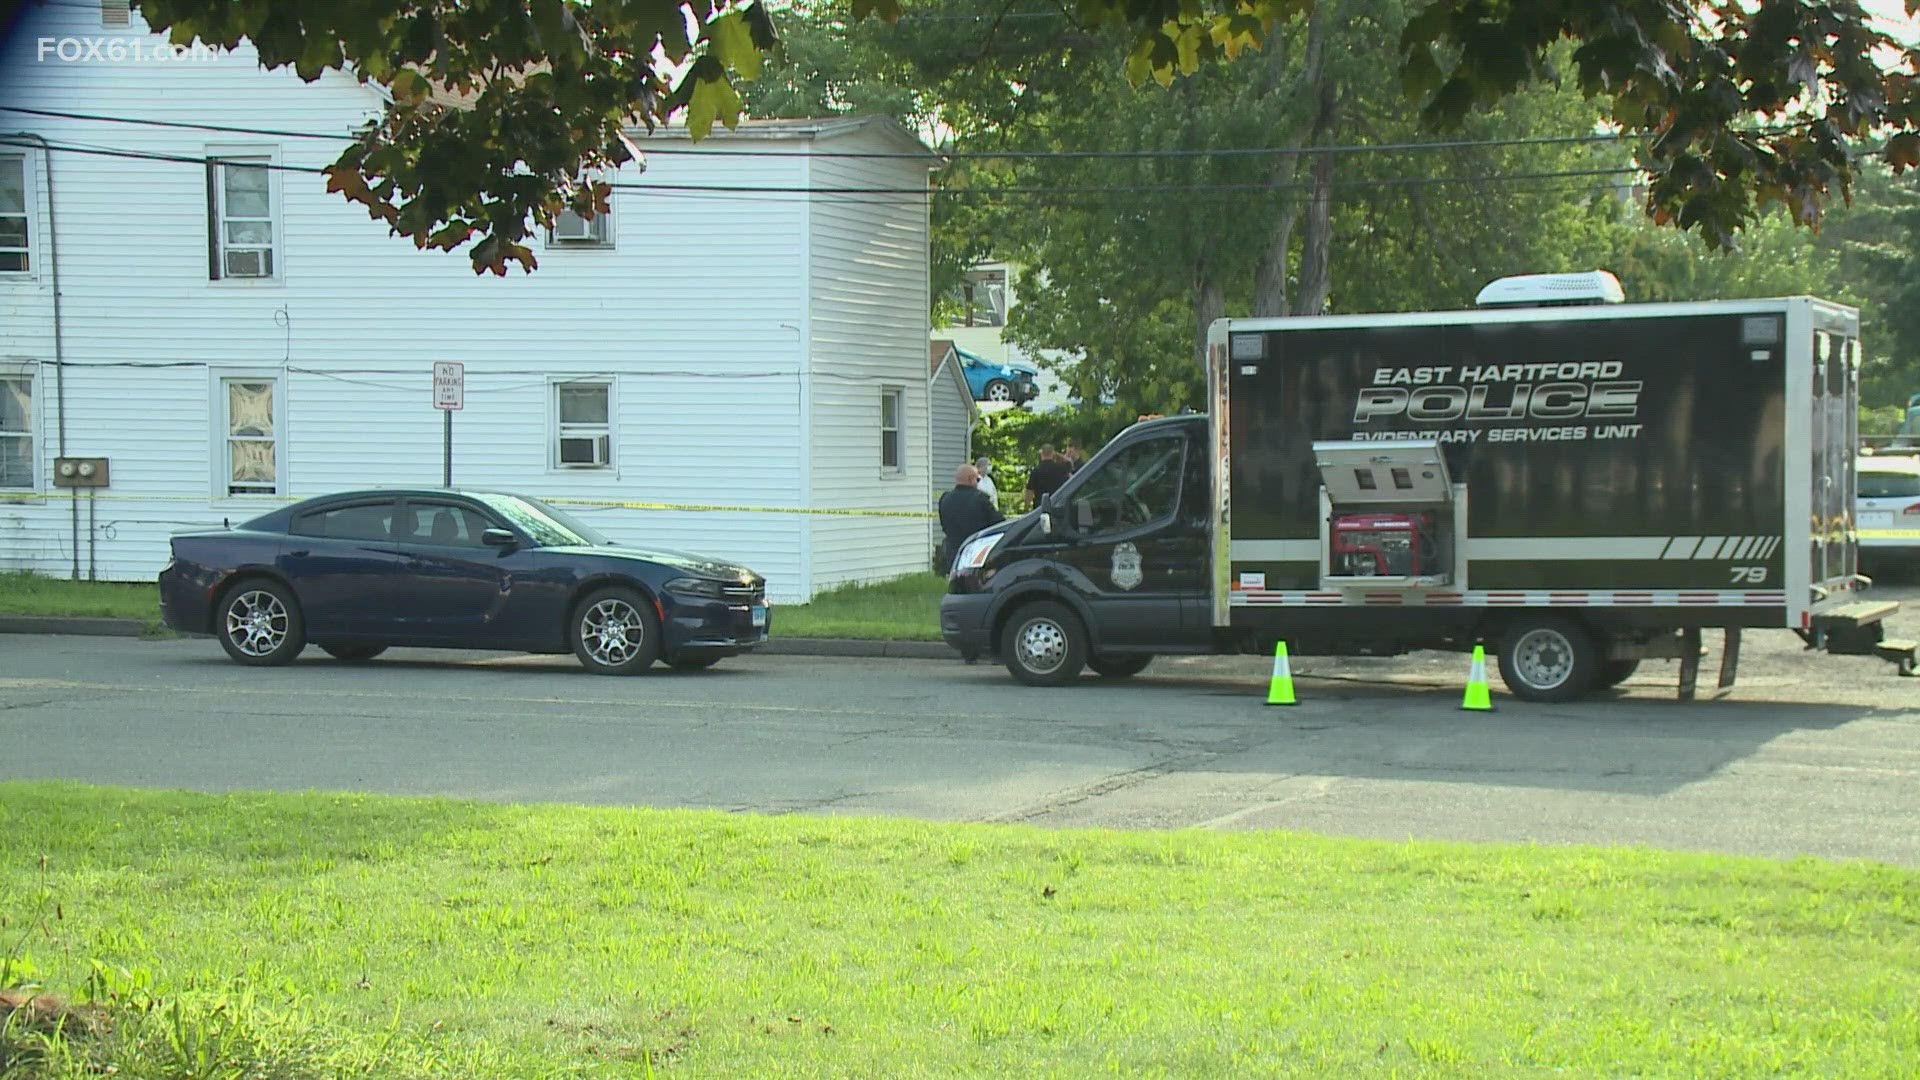 A man is dead after a shooting in East Hartford over the weekend, police said.

According to East Hartford officials, police were called to Burnside Avenue.